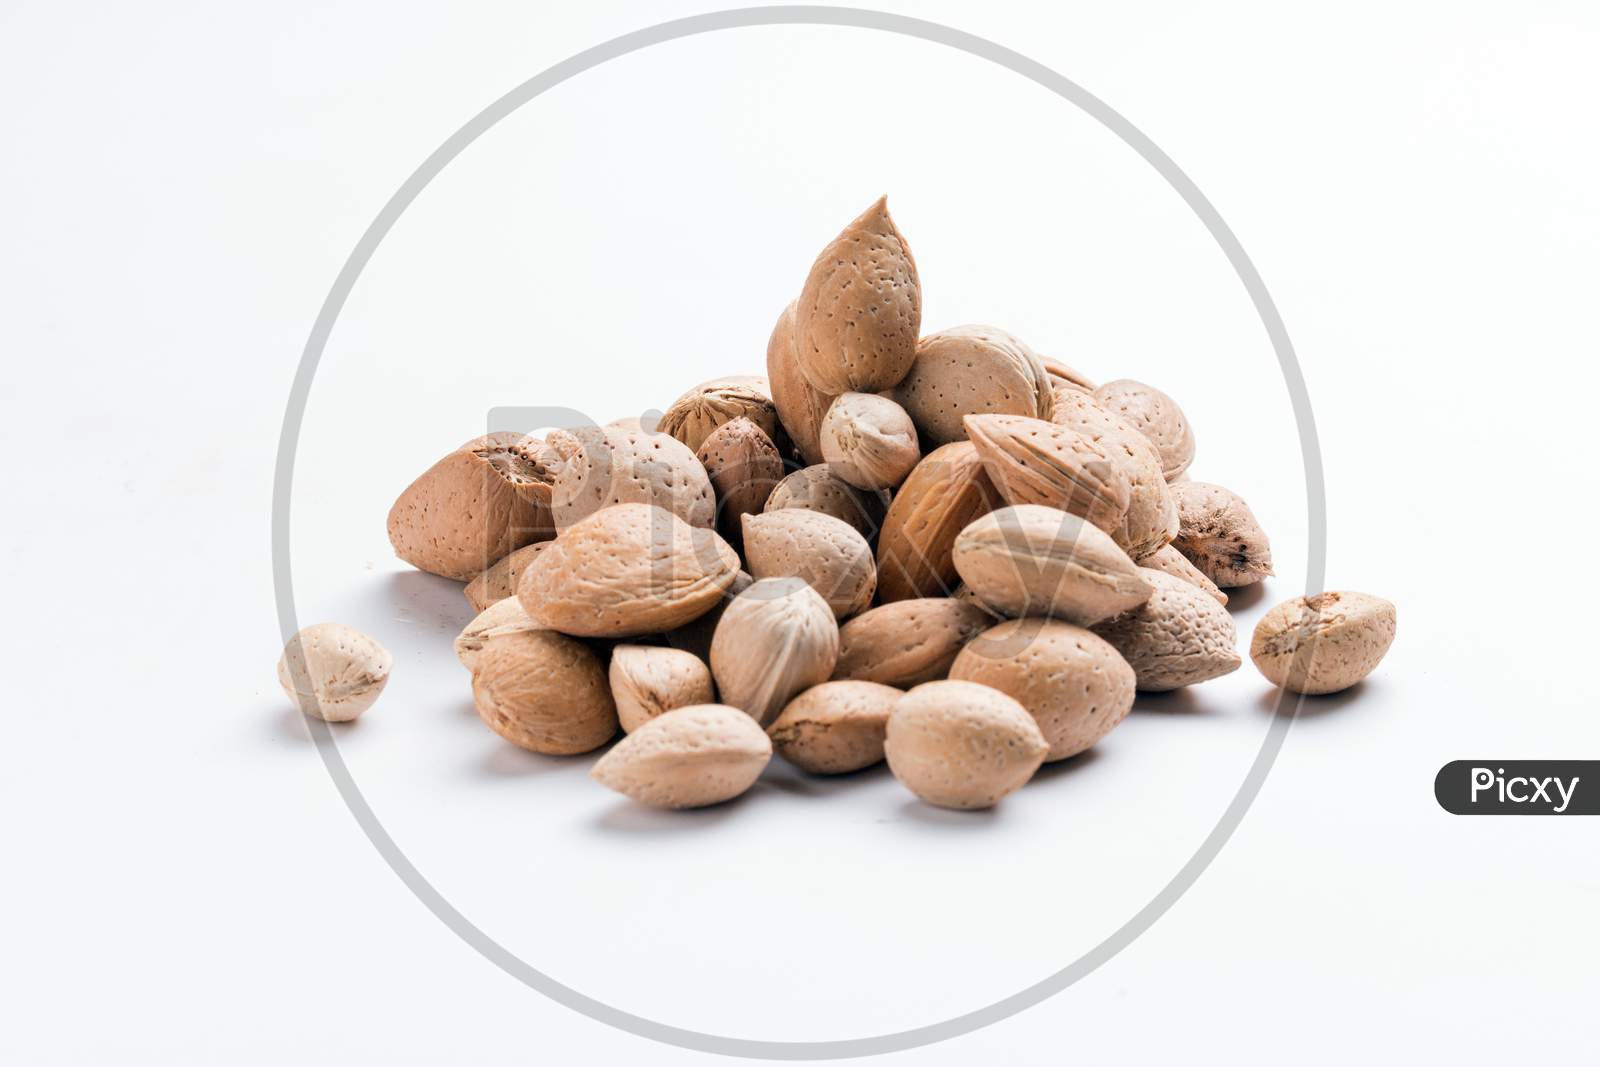 Almonds With Shell, Prunus Amygdalus Heaped On White Background